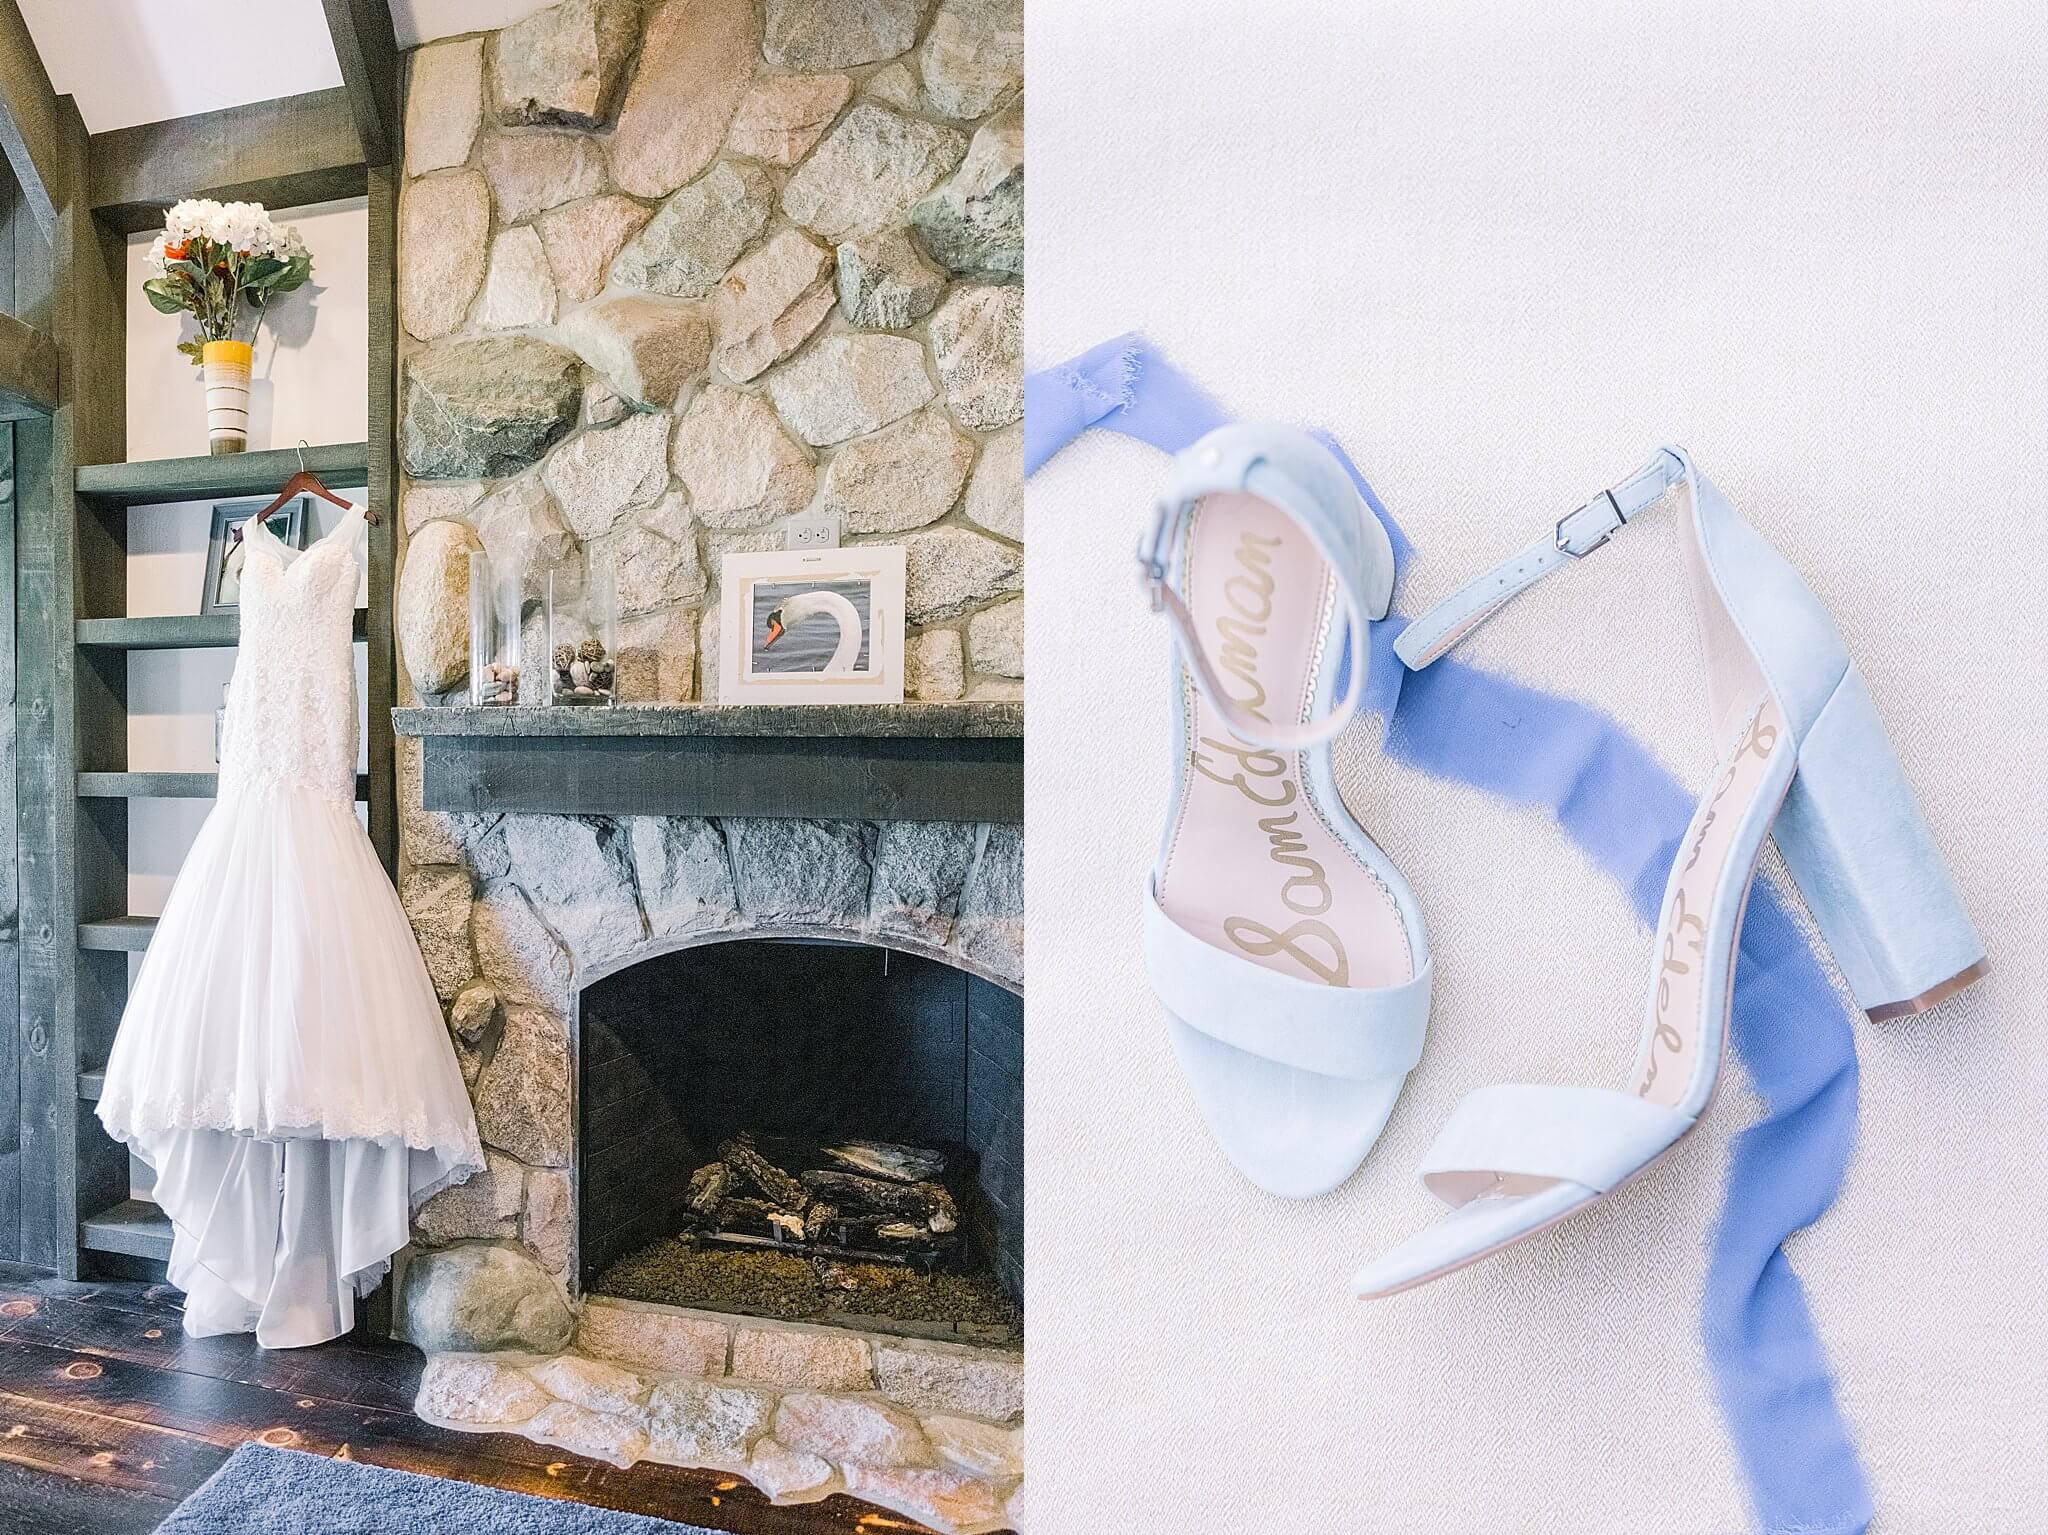 Bride's dress and shoes for Castle Farms wedding.